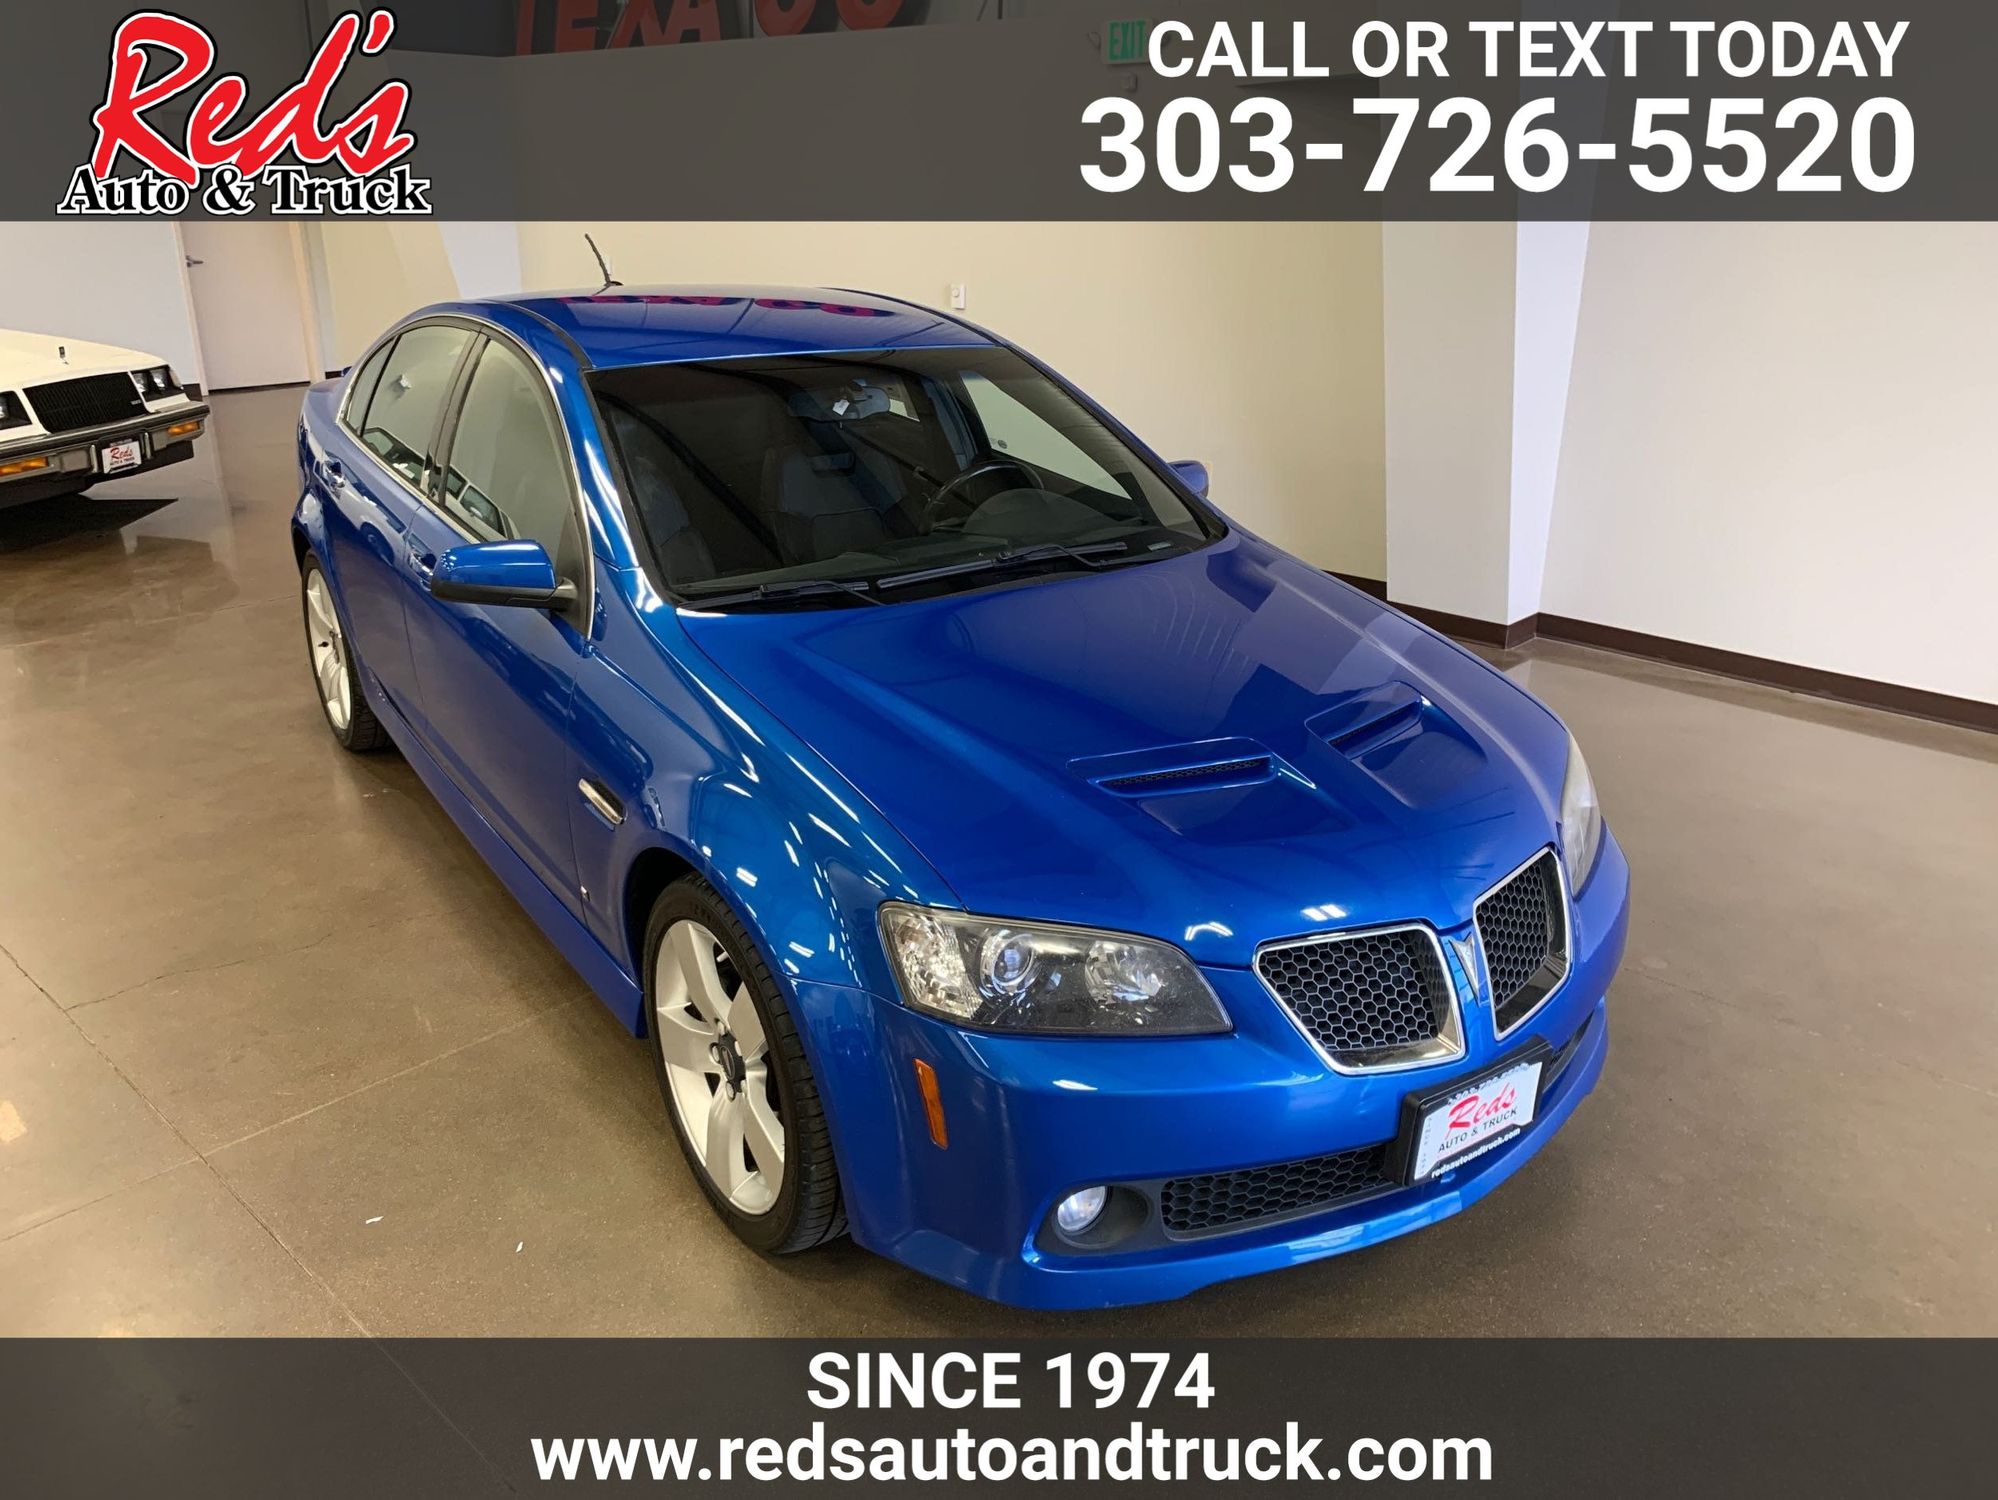 2009 Pontiac G8 Gt W Bluetooth Red S Auto And Truck